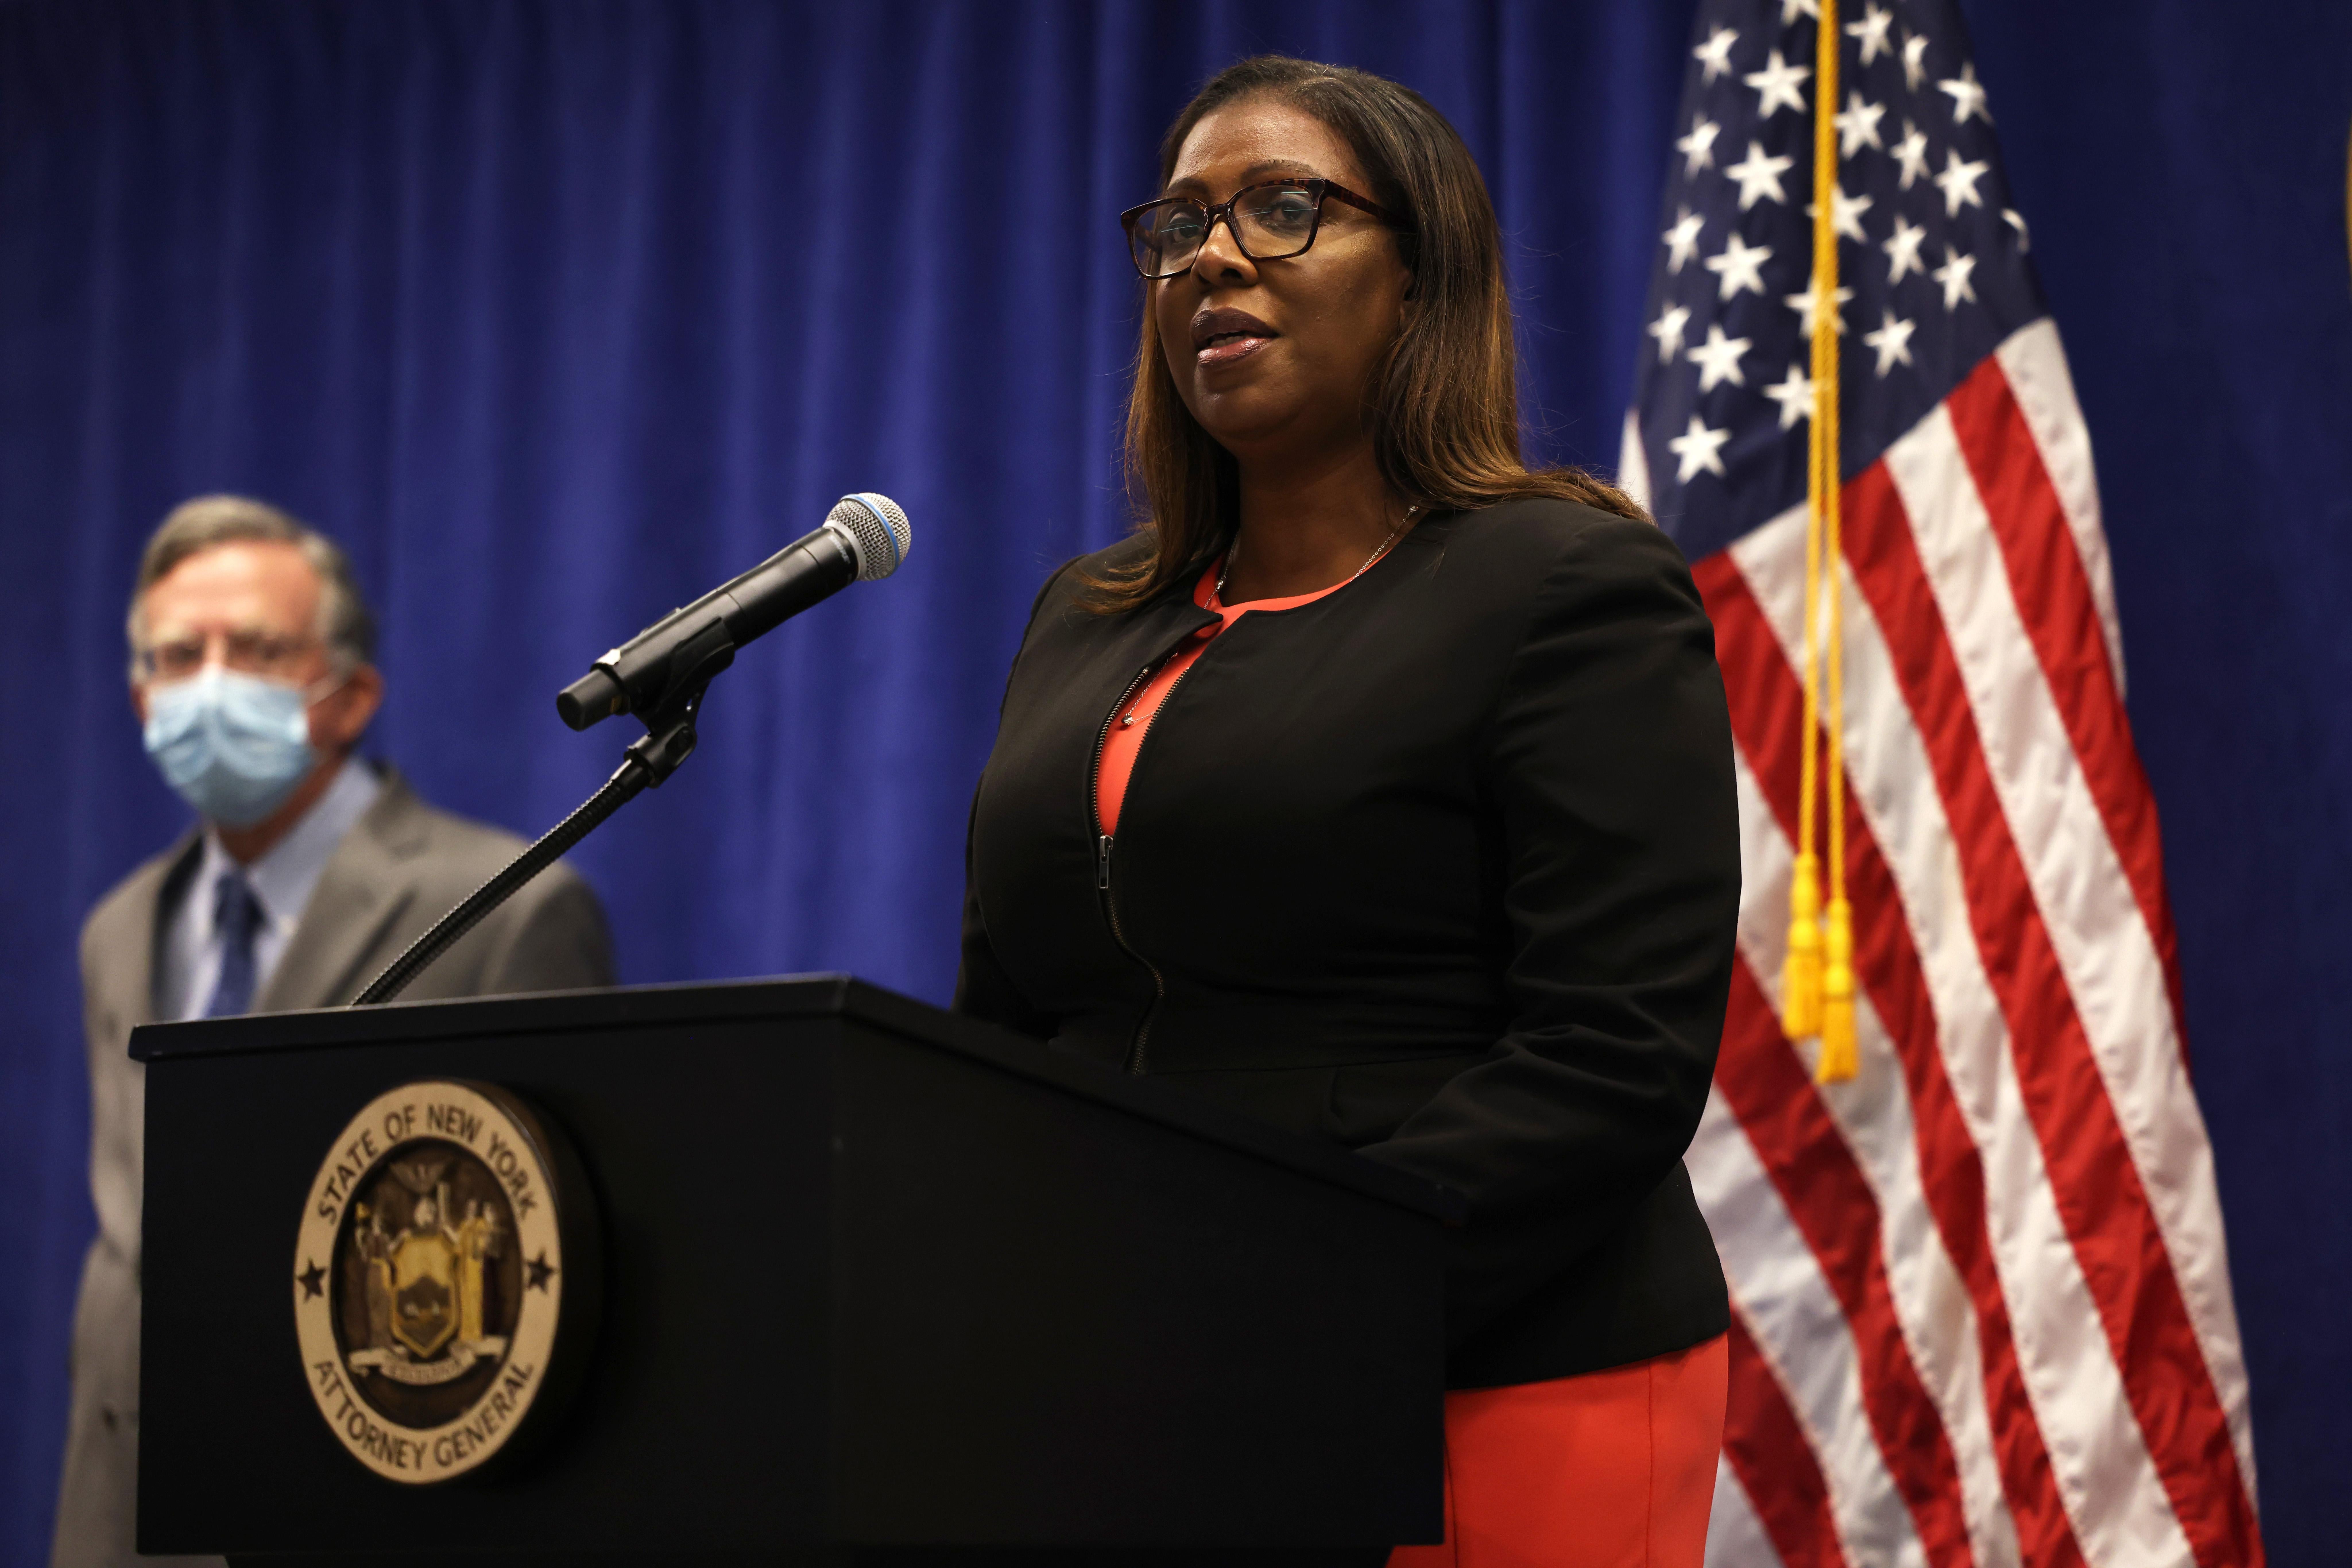 Letitia James stands at a podium with an American flag backdrop.